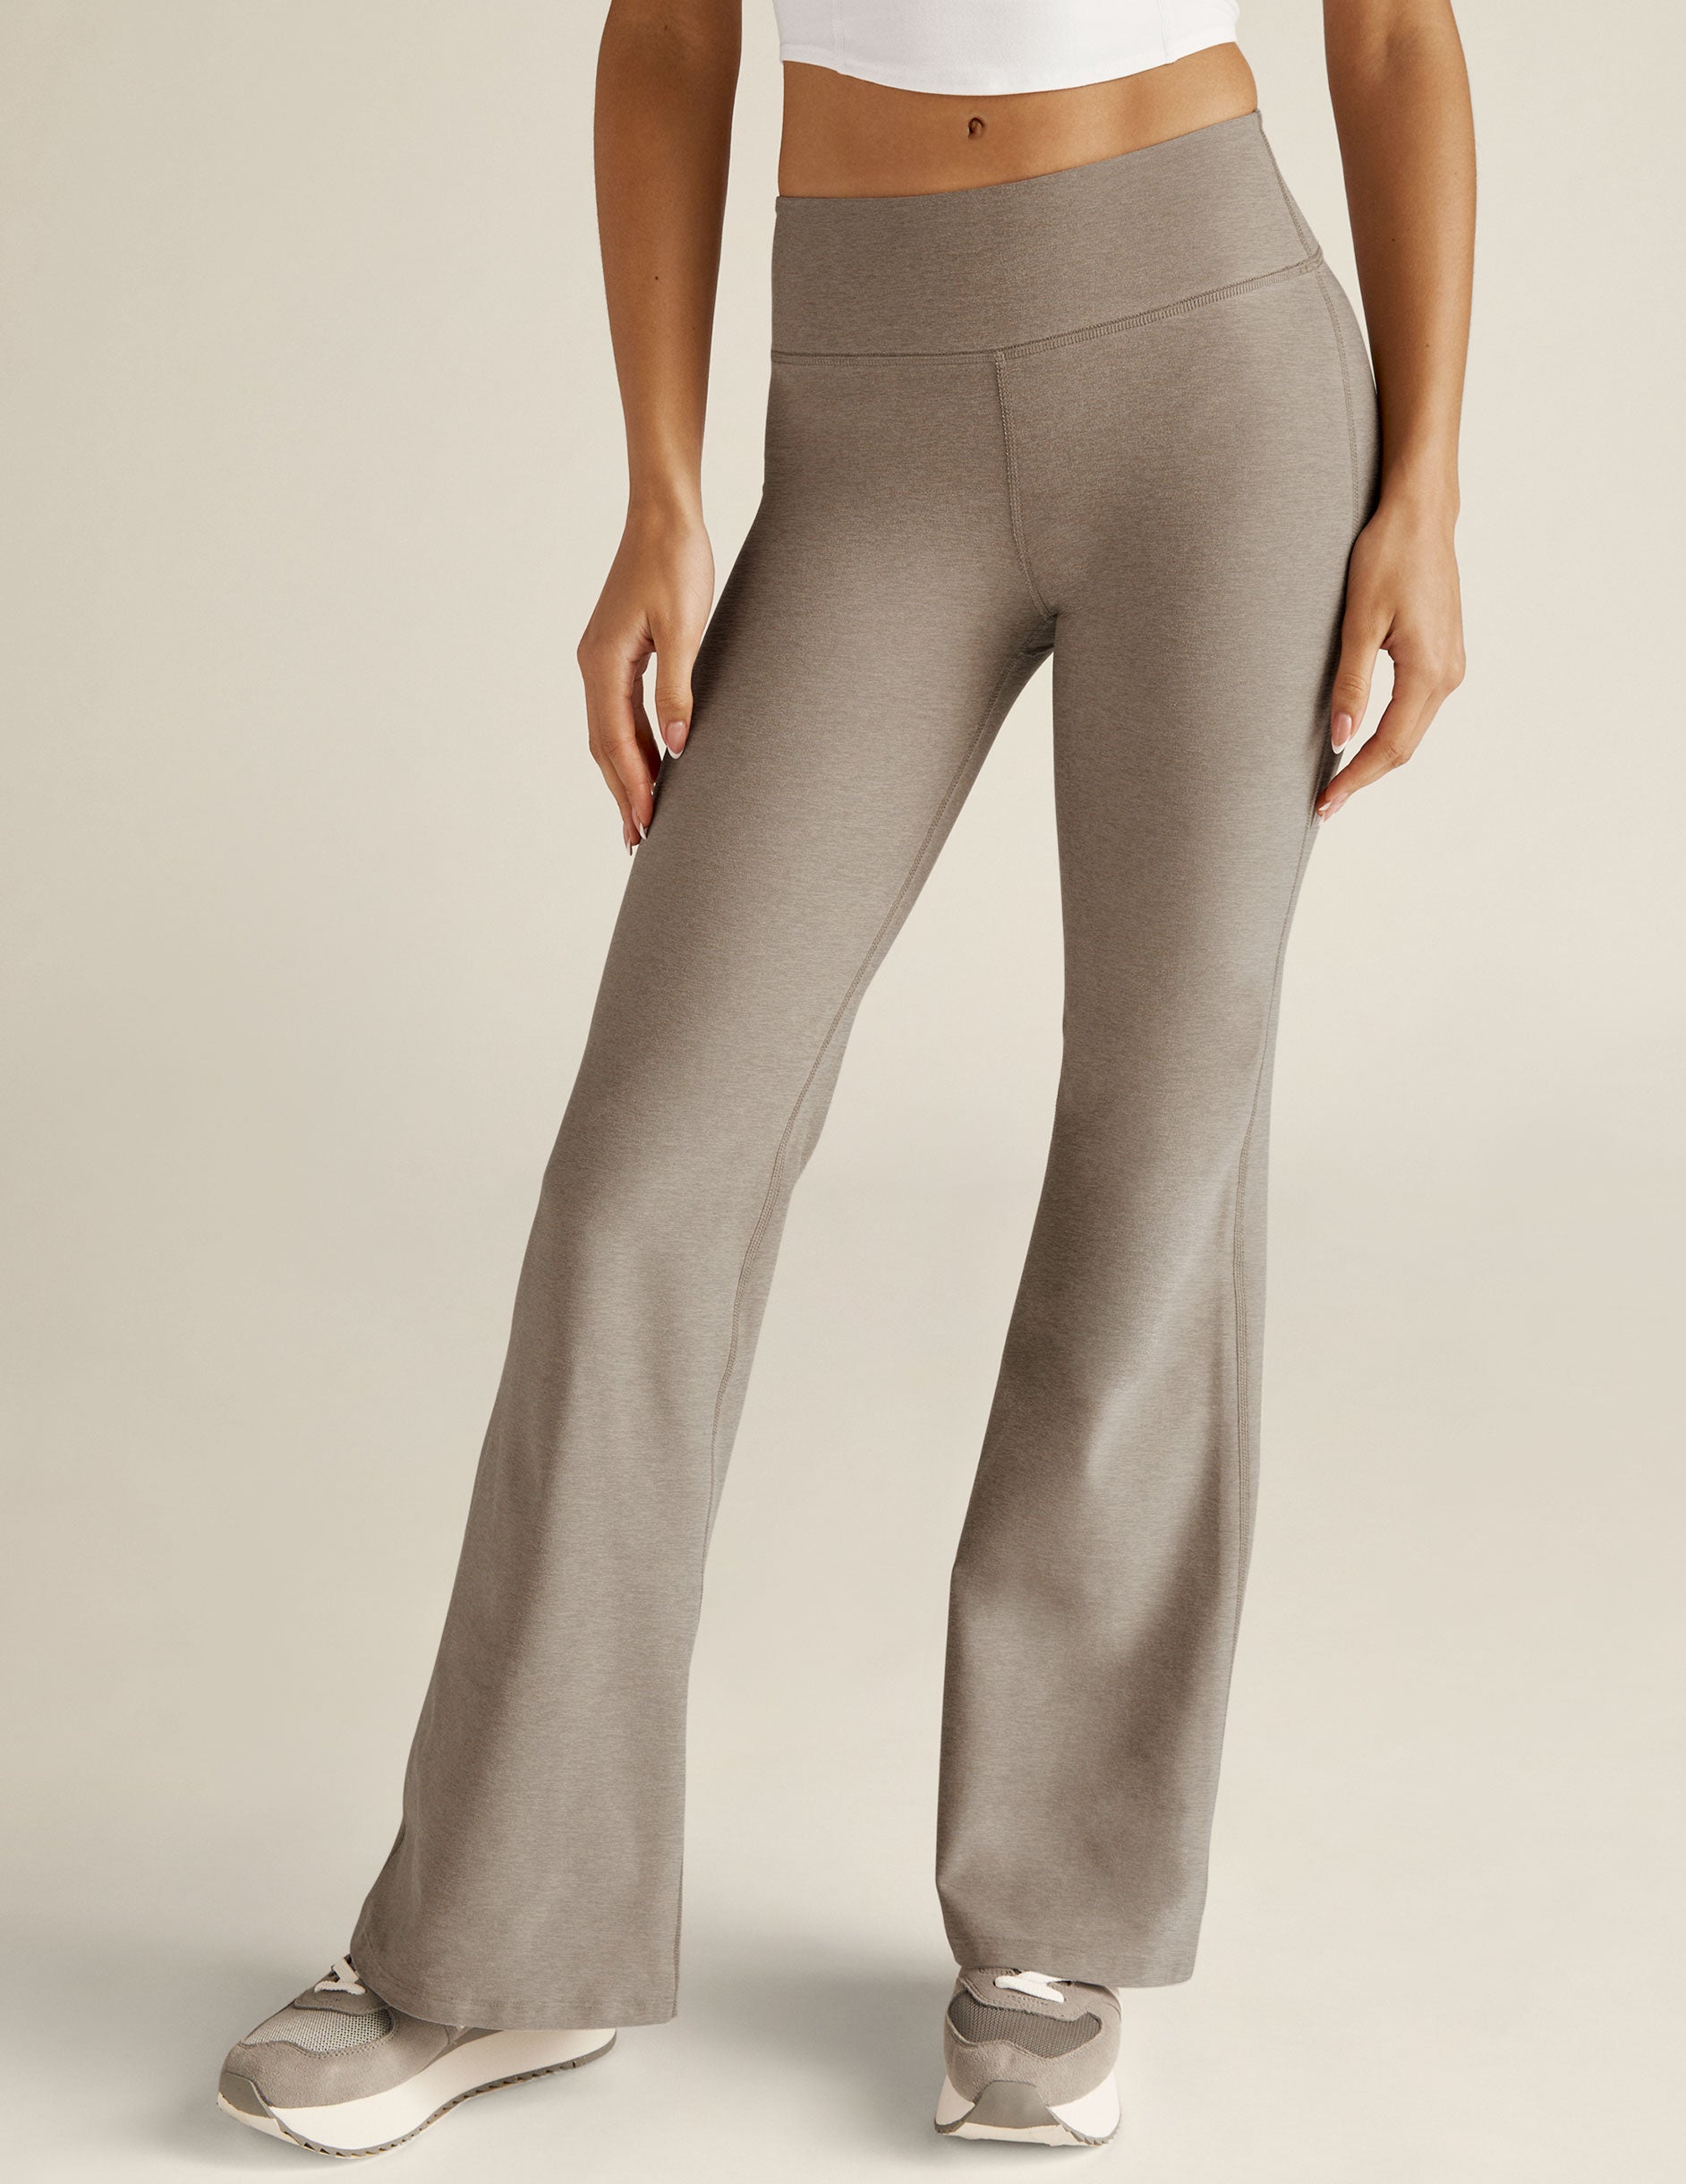 Women's Ultra High-Rise Flare Leggings - All in Motion Heathered